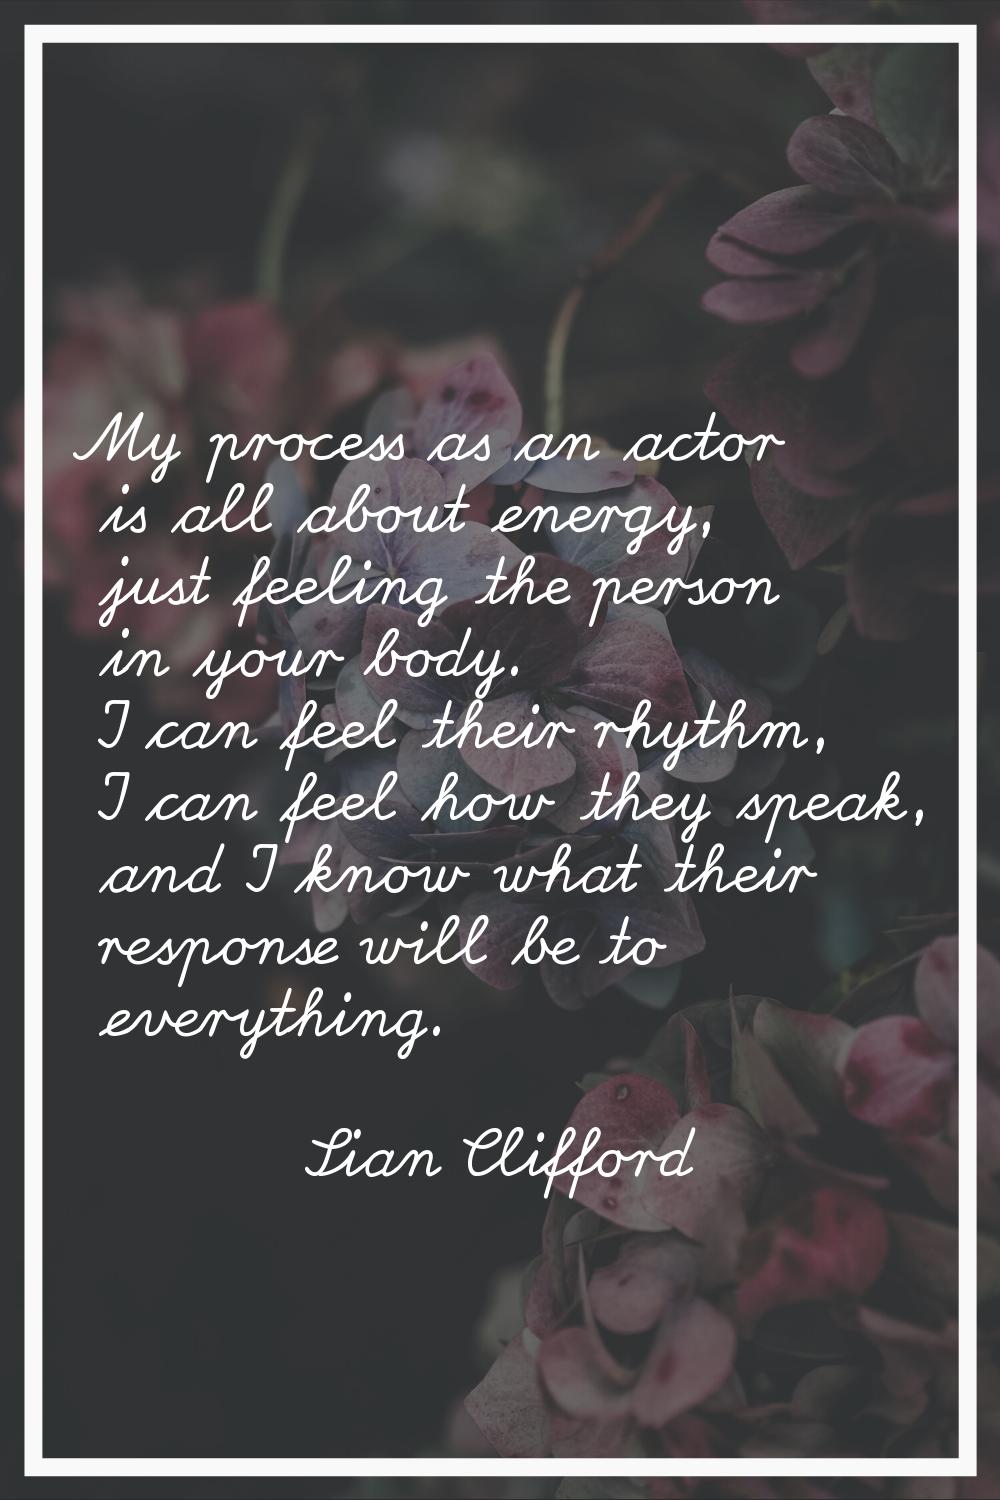 My process as an actor is all about energy, just feeling the person in your body. I can feel their 